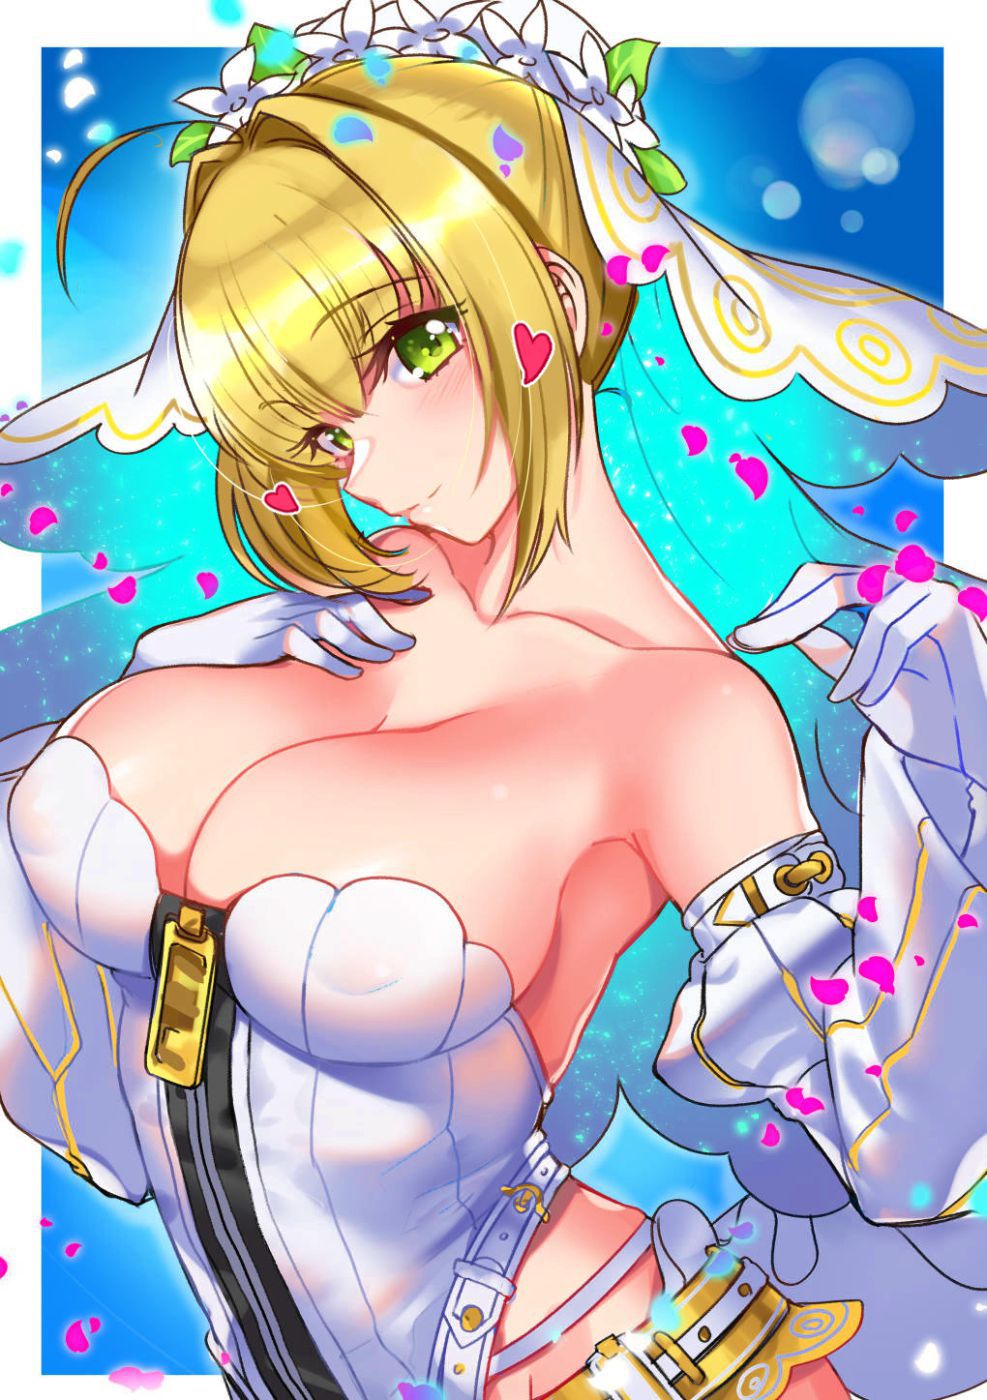 [Secondary erotic] Click here for a summary of erotic images of Nero Claudius in the Fate series 2